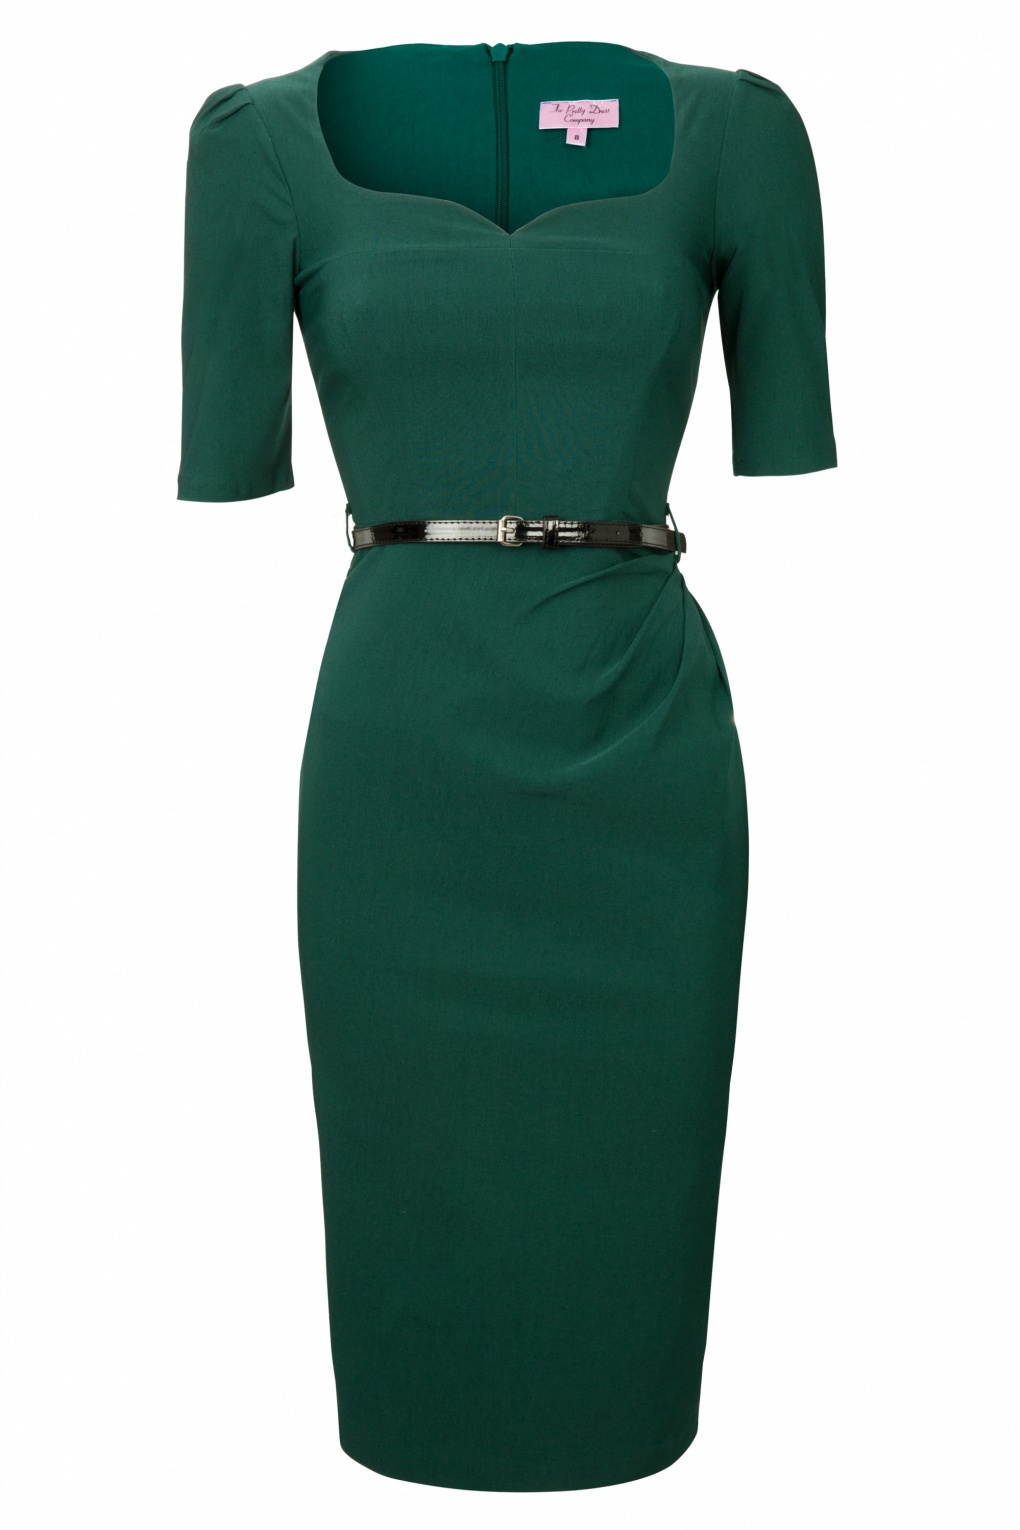 Charlotte Sweetheart Pencil dress in Forest Green 1/2 sleeve